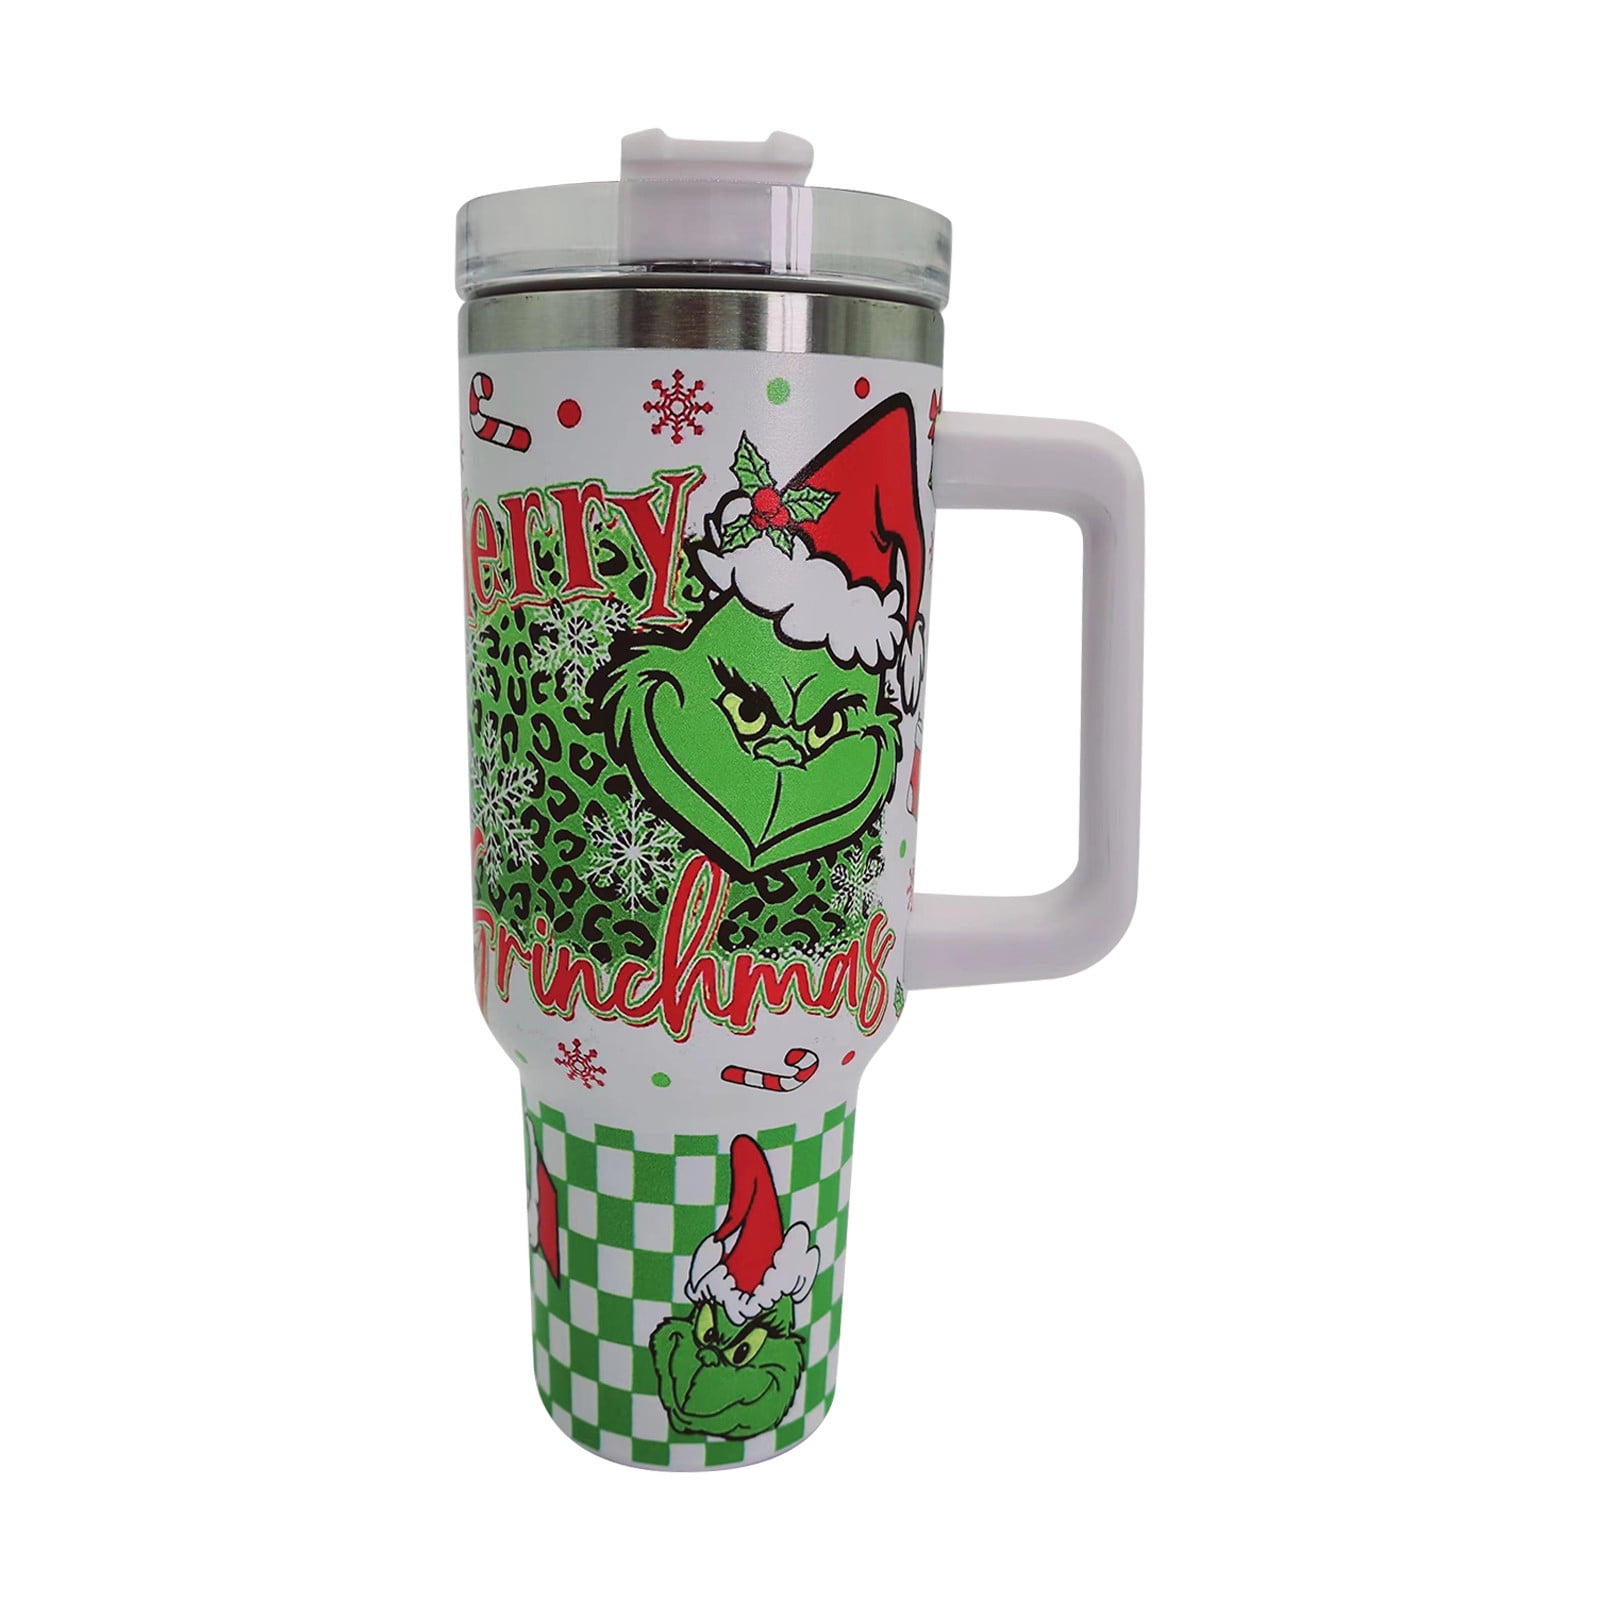 40 oz Tumbler with Handle and Lid, Grinch Tumbler Cup, Stainless Steel Grinch  Cup Reusable Insulated Cup and Water Tumbler Cup with Grinch Pateern, Best  Christmas Gifts for Car Cup Holder,Travel,Gym 